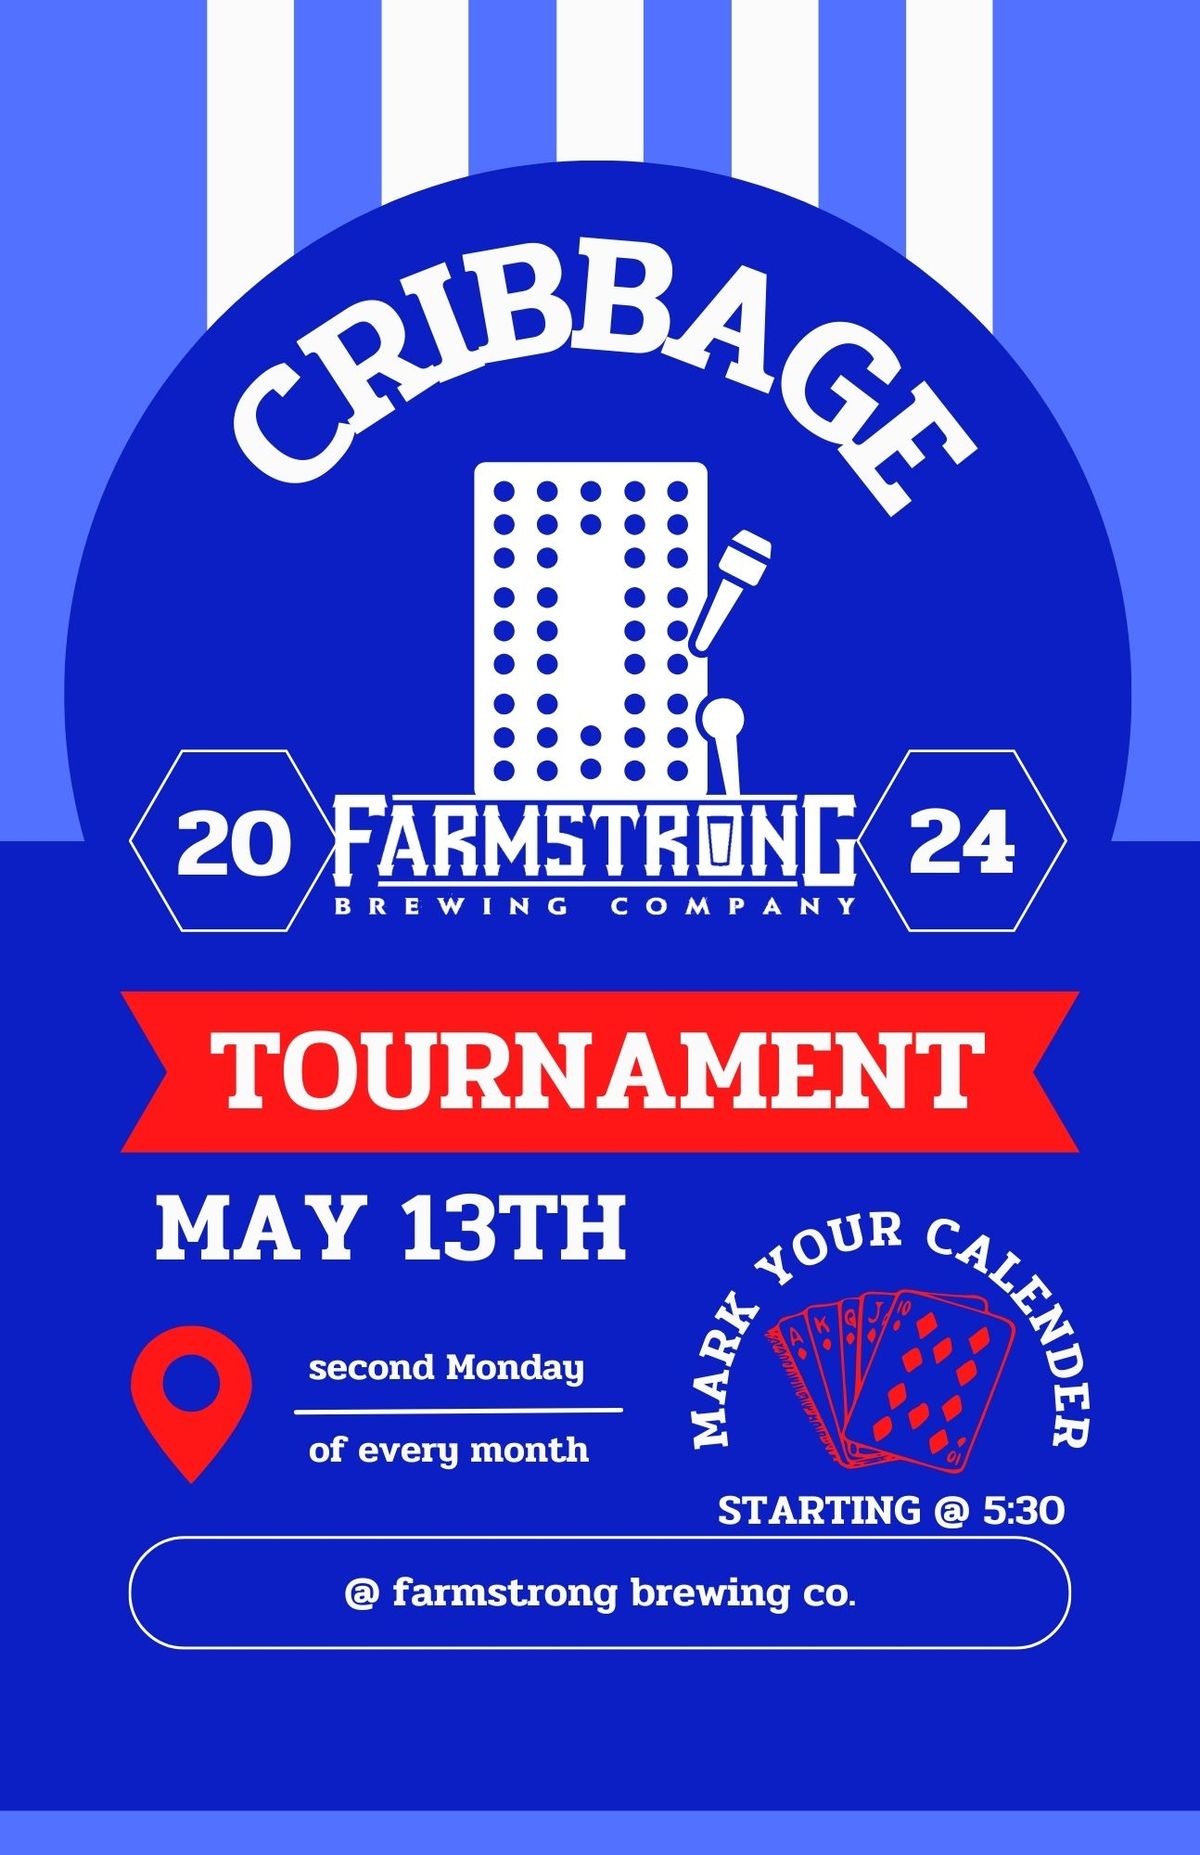 Cribbage Tournament at Farmstrong Brewing